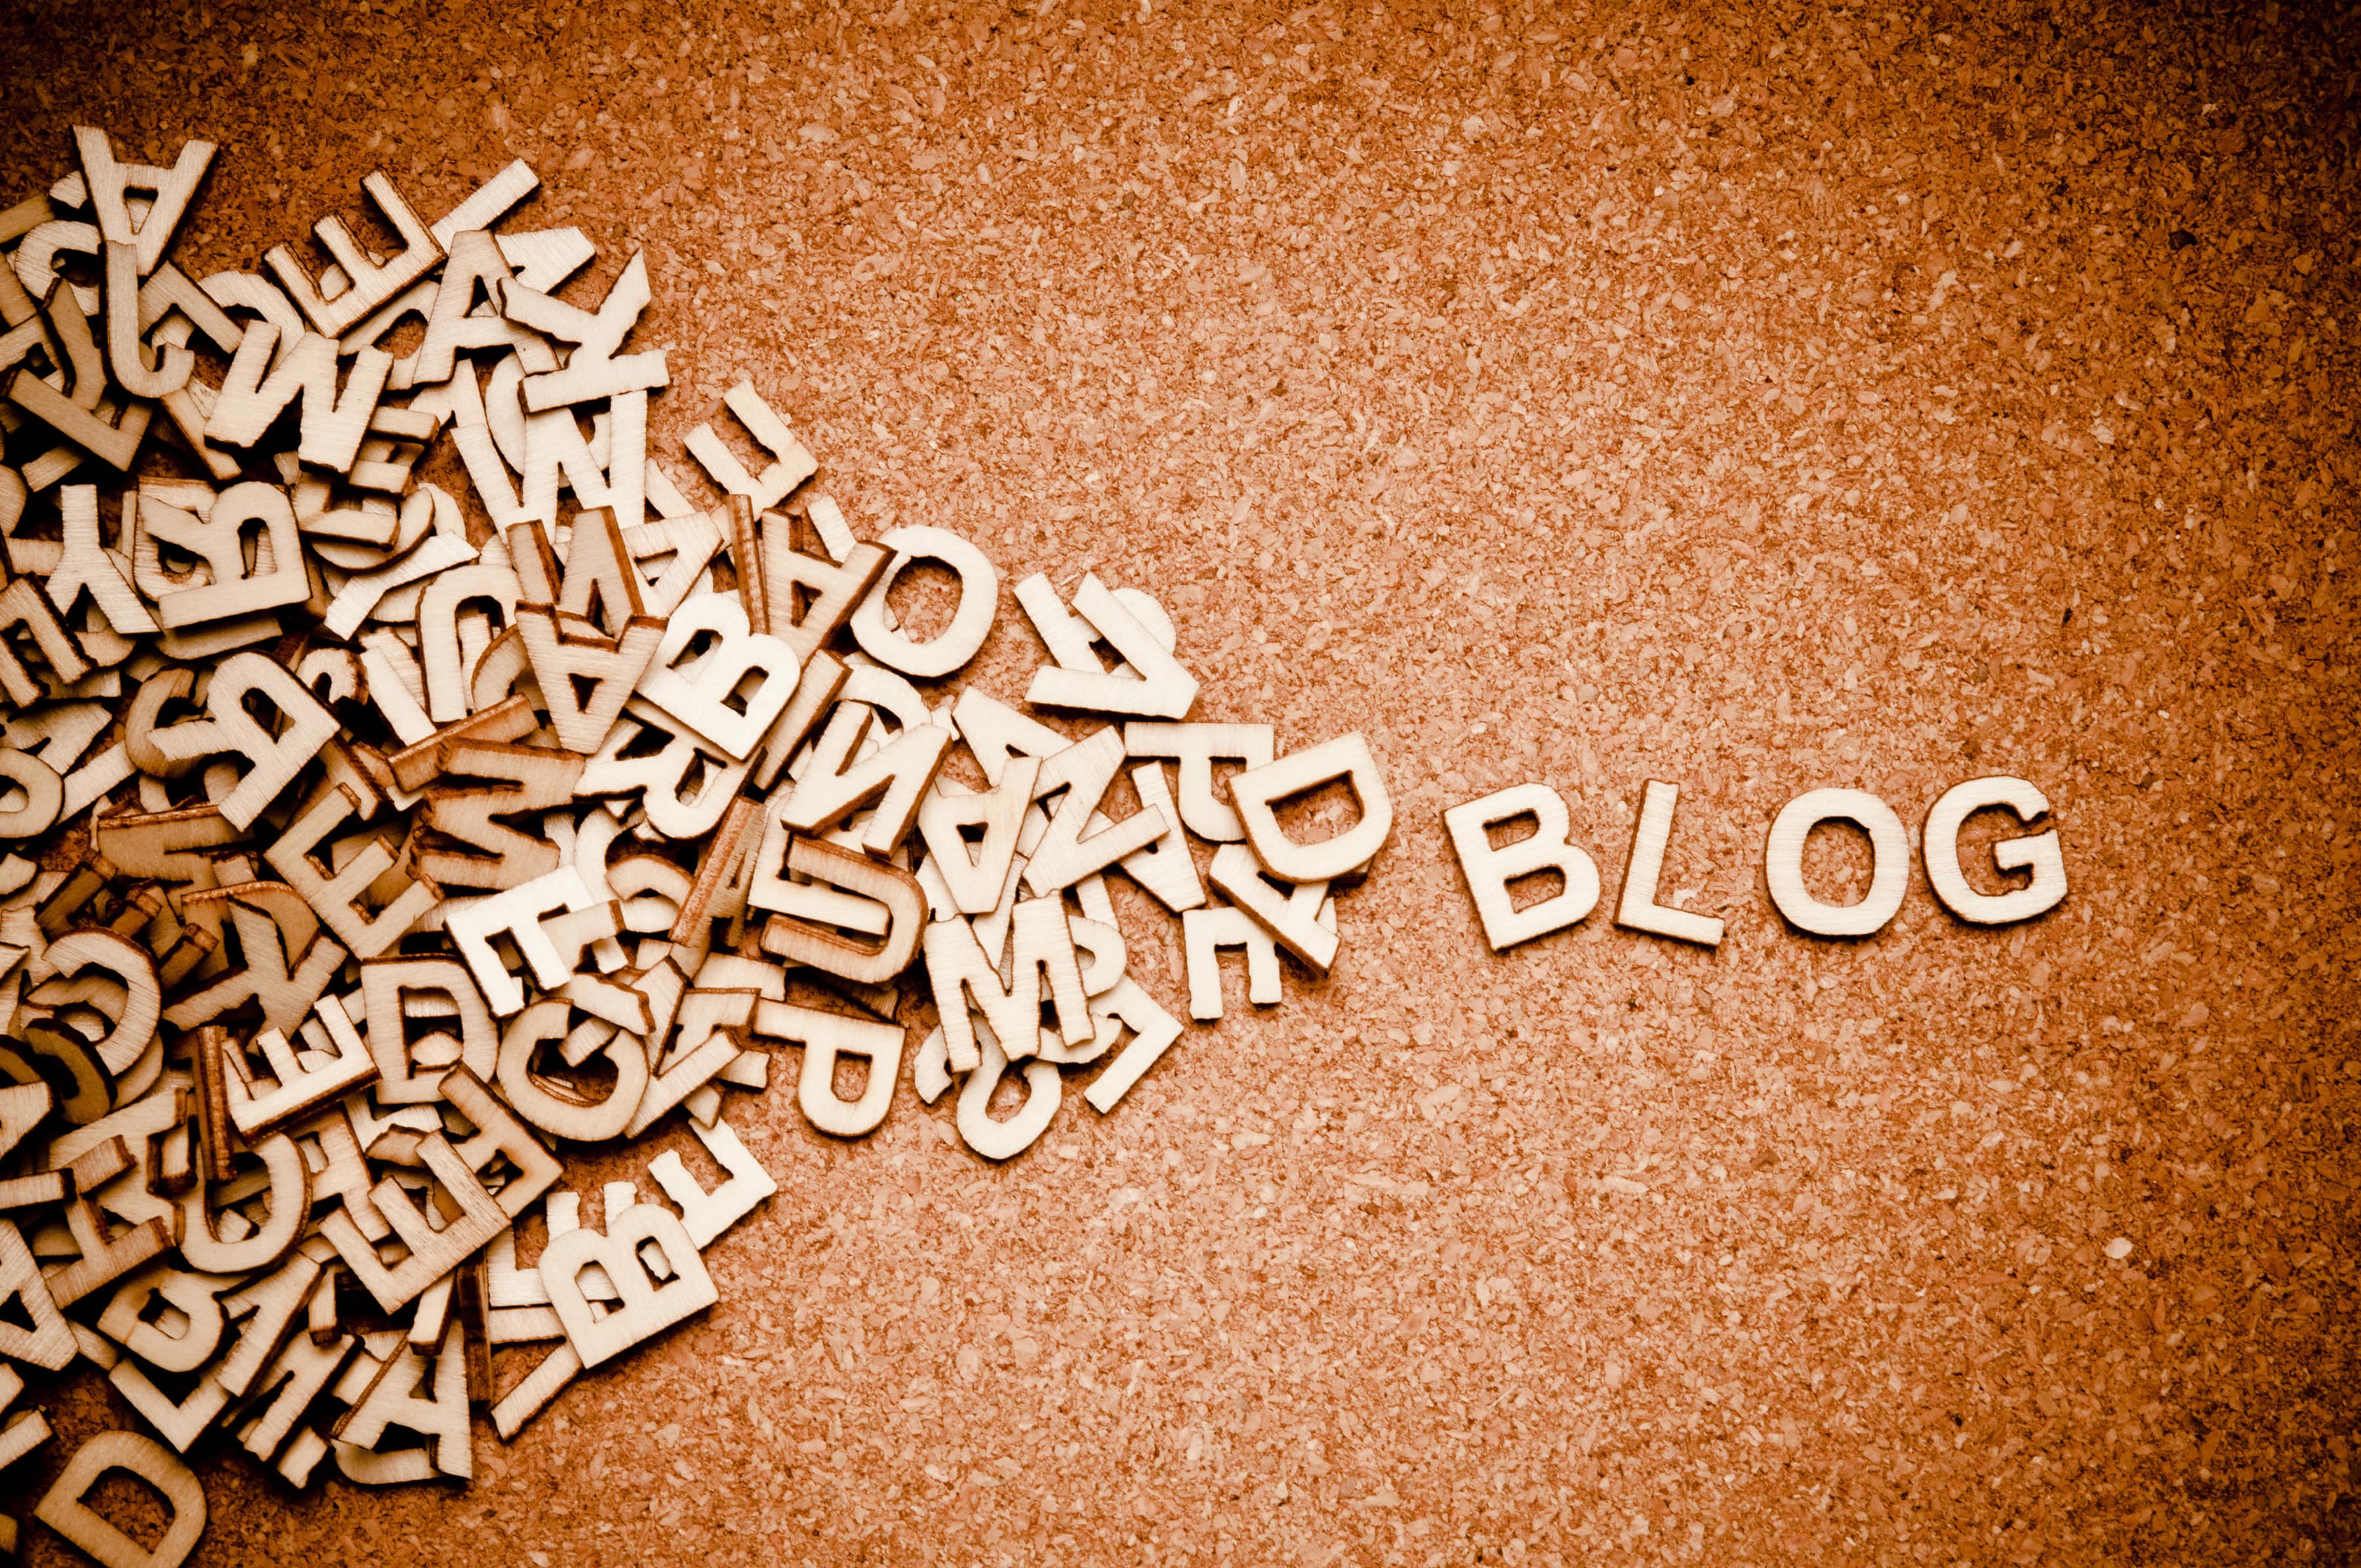 Blogging is great, but here are some dos and don’ts